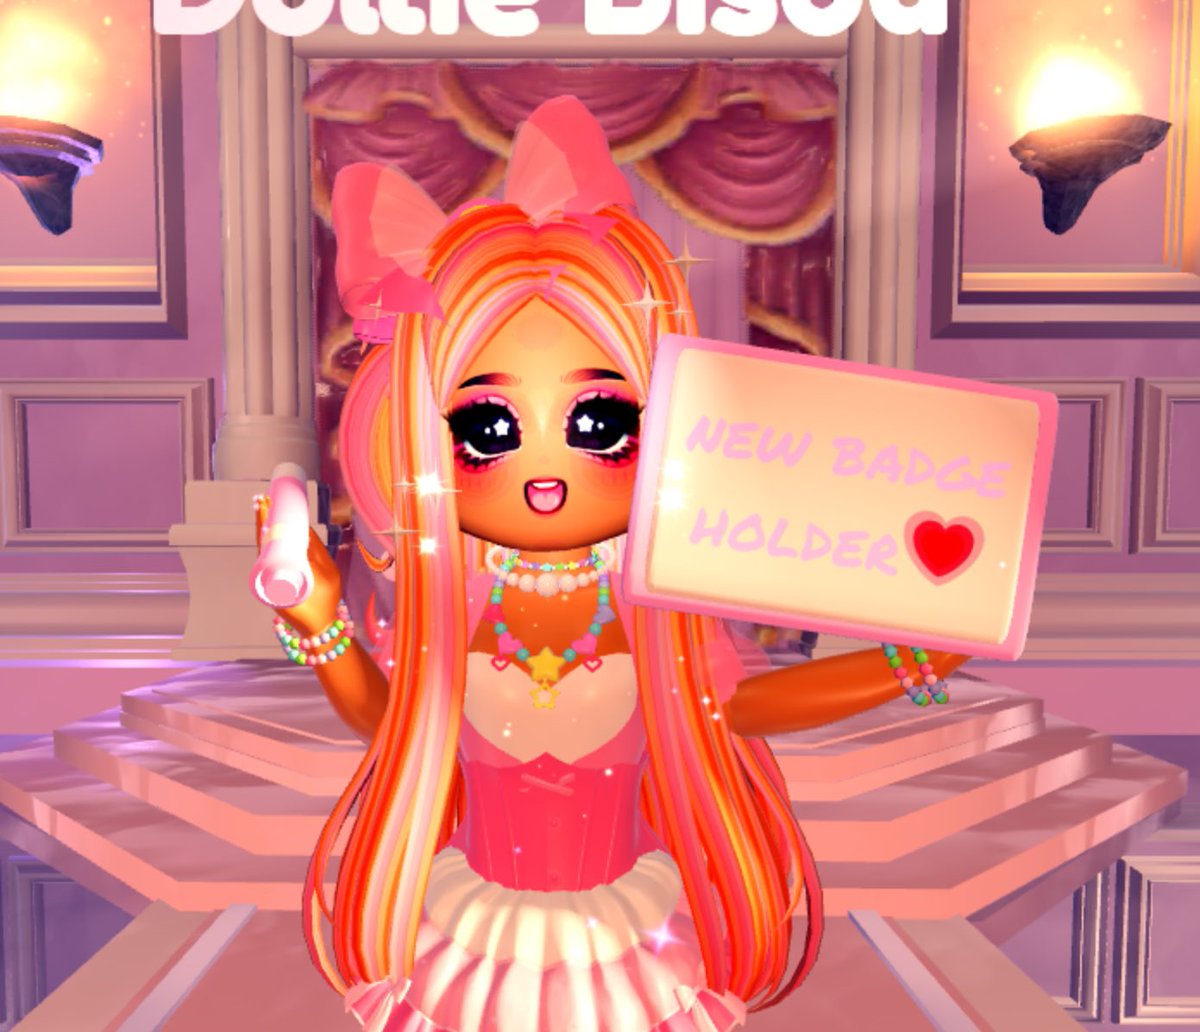 once all the new badge holders are revealed they should take a group pic with their board! i think it could be very cute 👑💗✨

#royalehigh #RHTC #RH